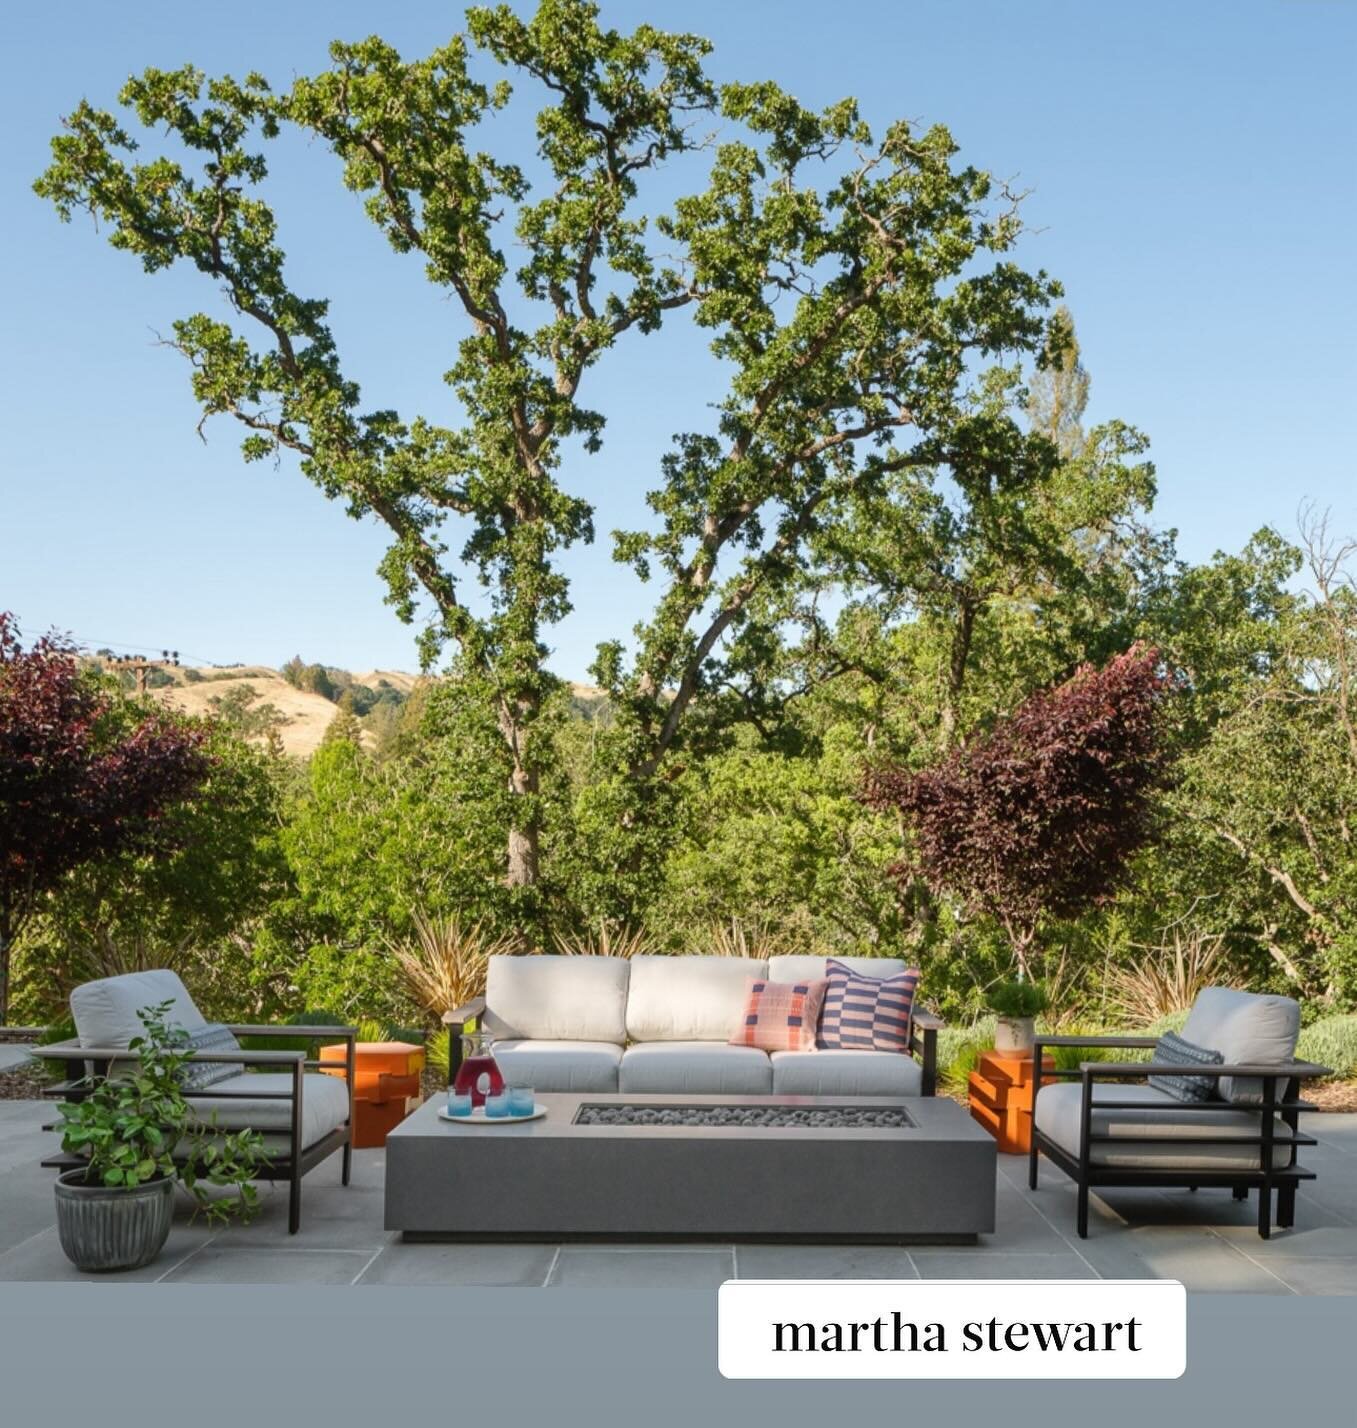 When I was in college, all I wanted to do was move to New York to work for @marthastewart48 I&rsquo;m such a fan and although I&rsquo;m sure Martha didn&rsquo;t actually select my image for this roundup of outdoor spaces, it&rsquo;s still feels prett